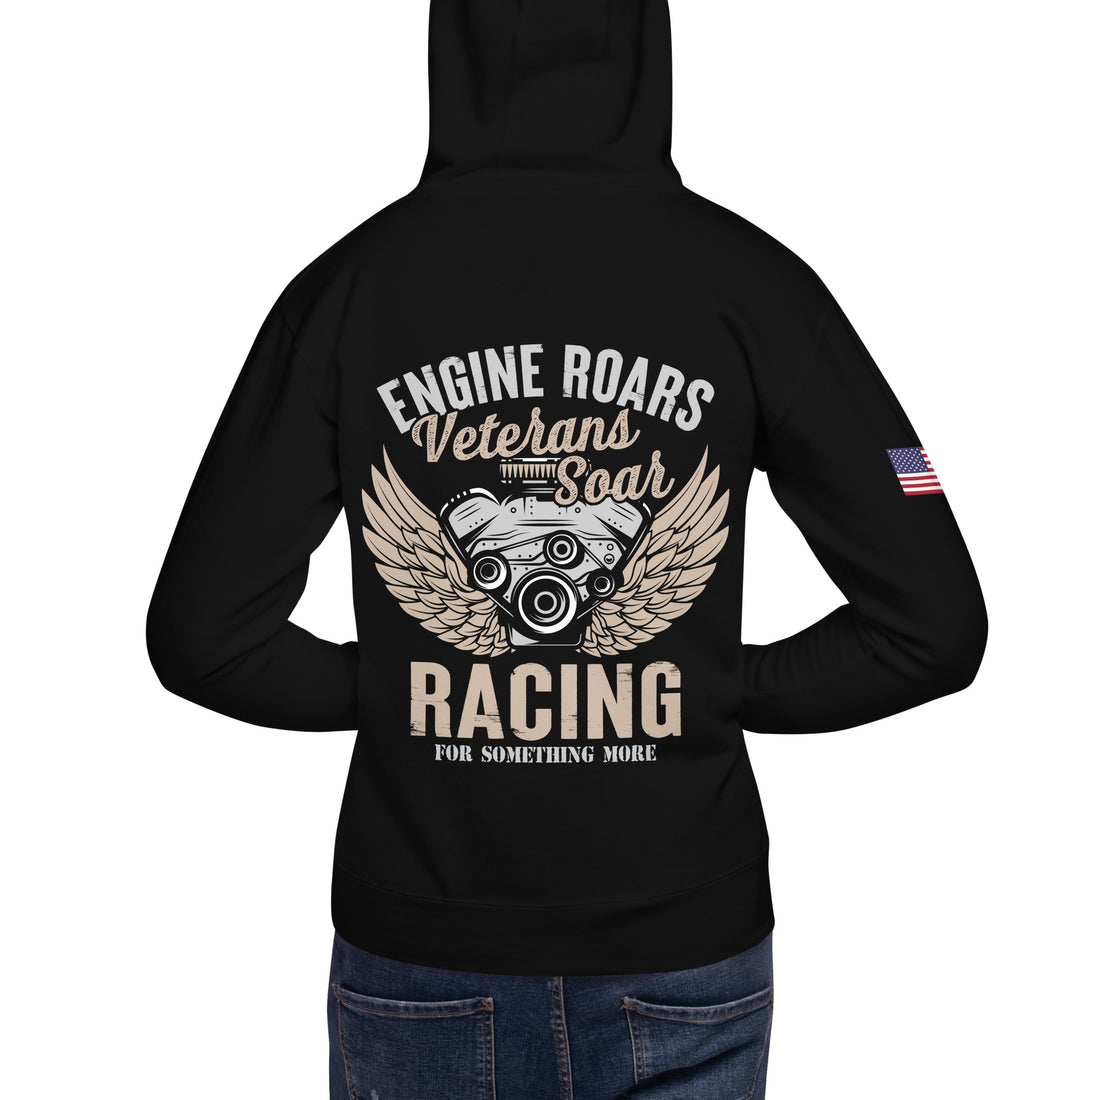 US Veterans Corp Supporter - Unisex Hoodie with a Cause